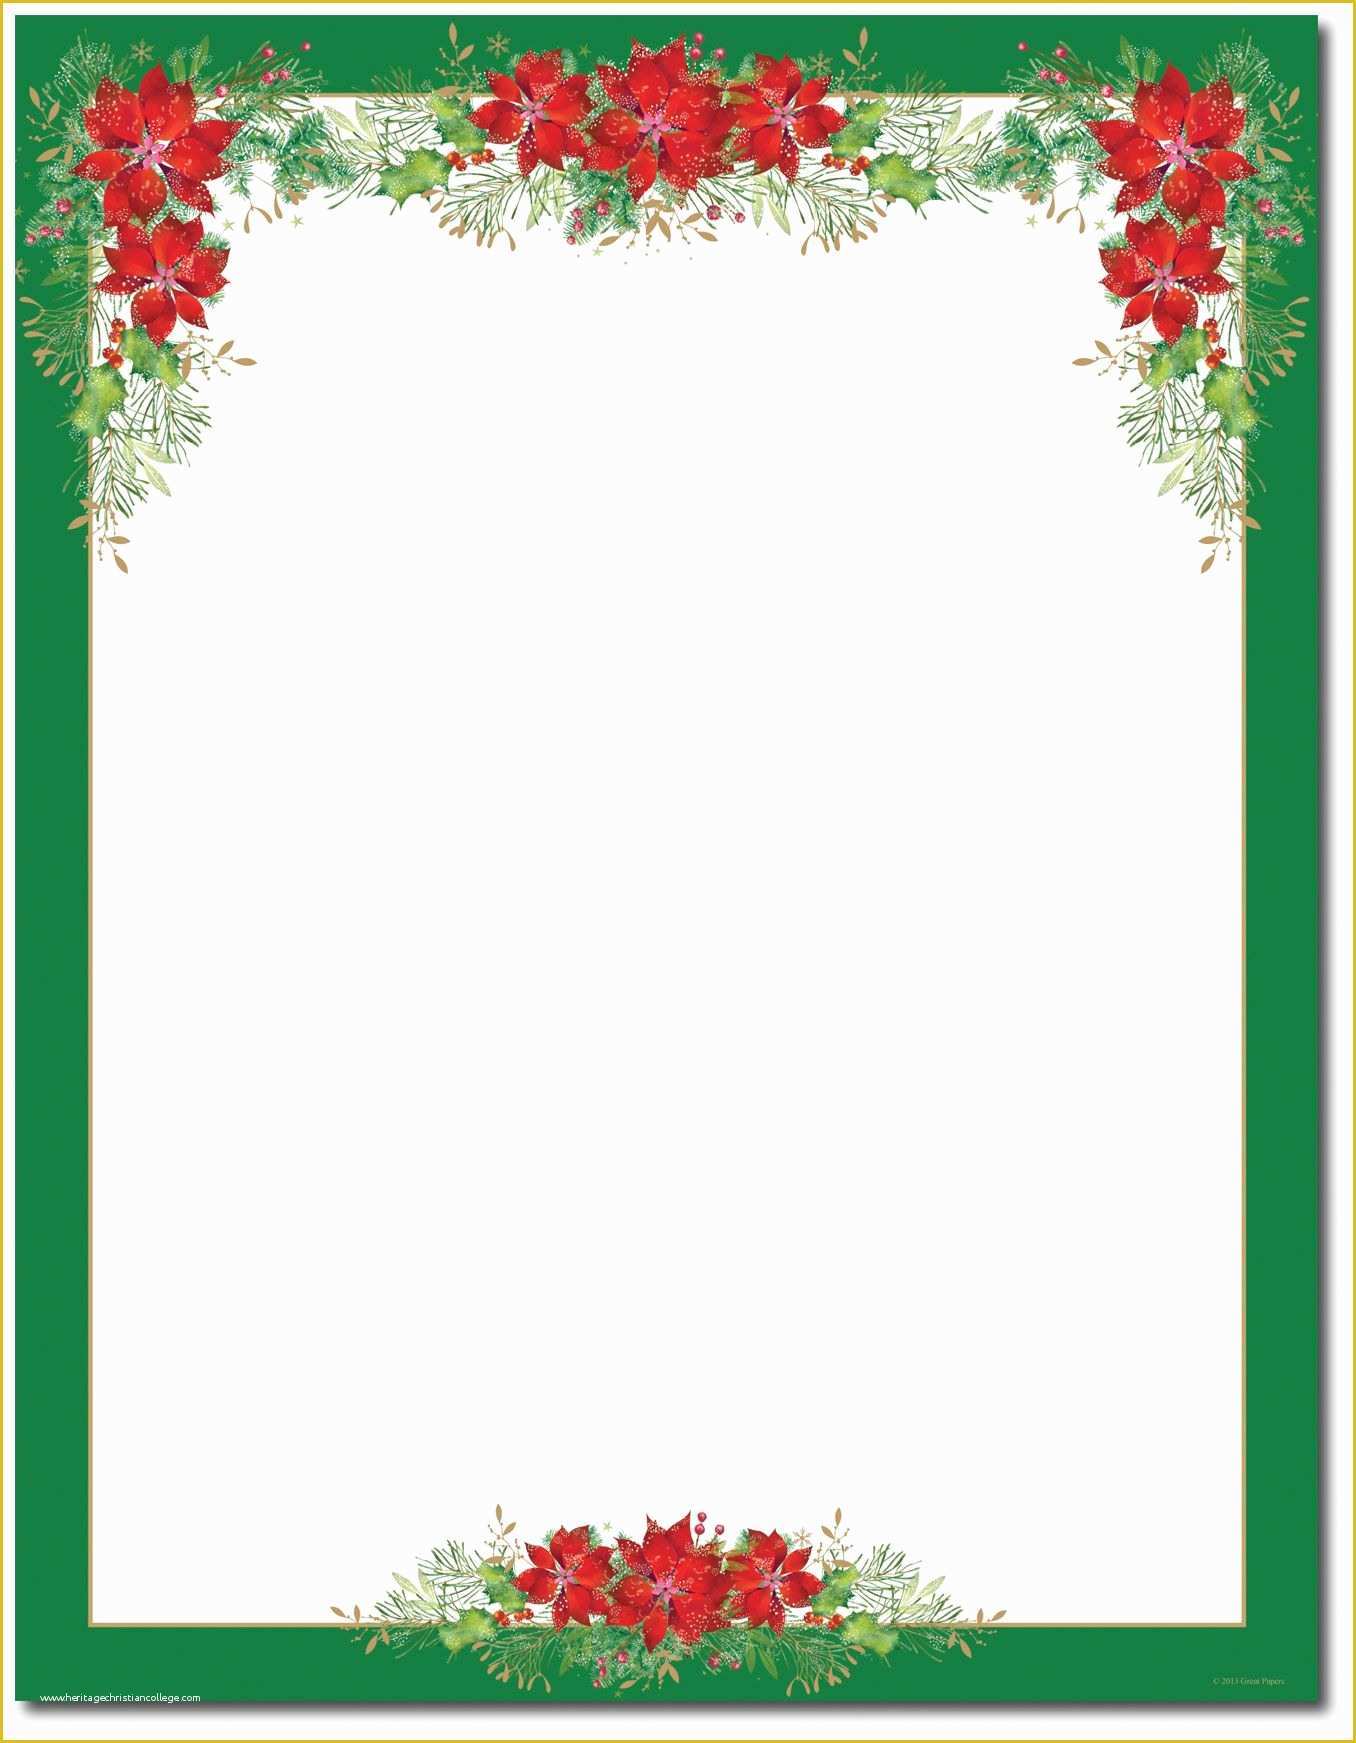 Free Printable Stationery Templates Of Poinsettia Valance Letterhead Holiday Papers